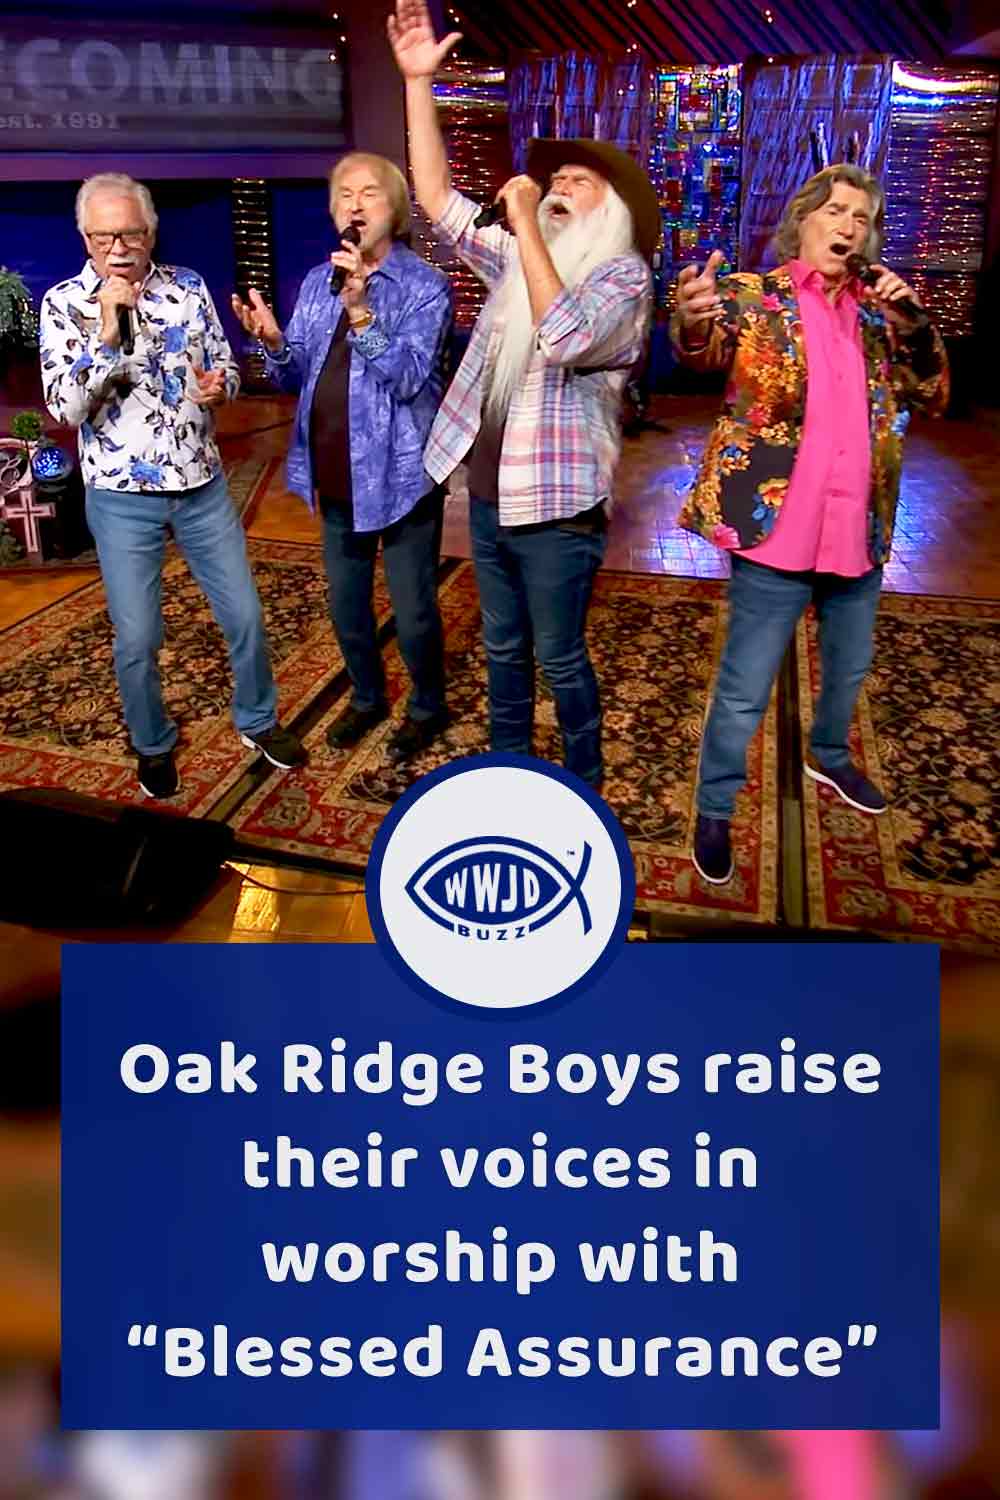 Oak Ridge Boys raise their voices in worship with “Blessed Assurance”